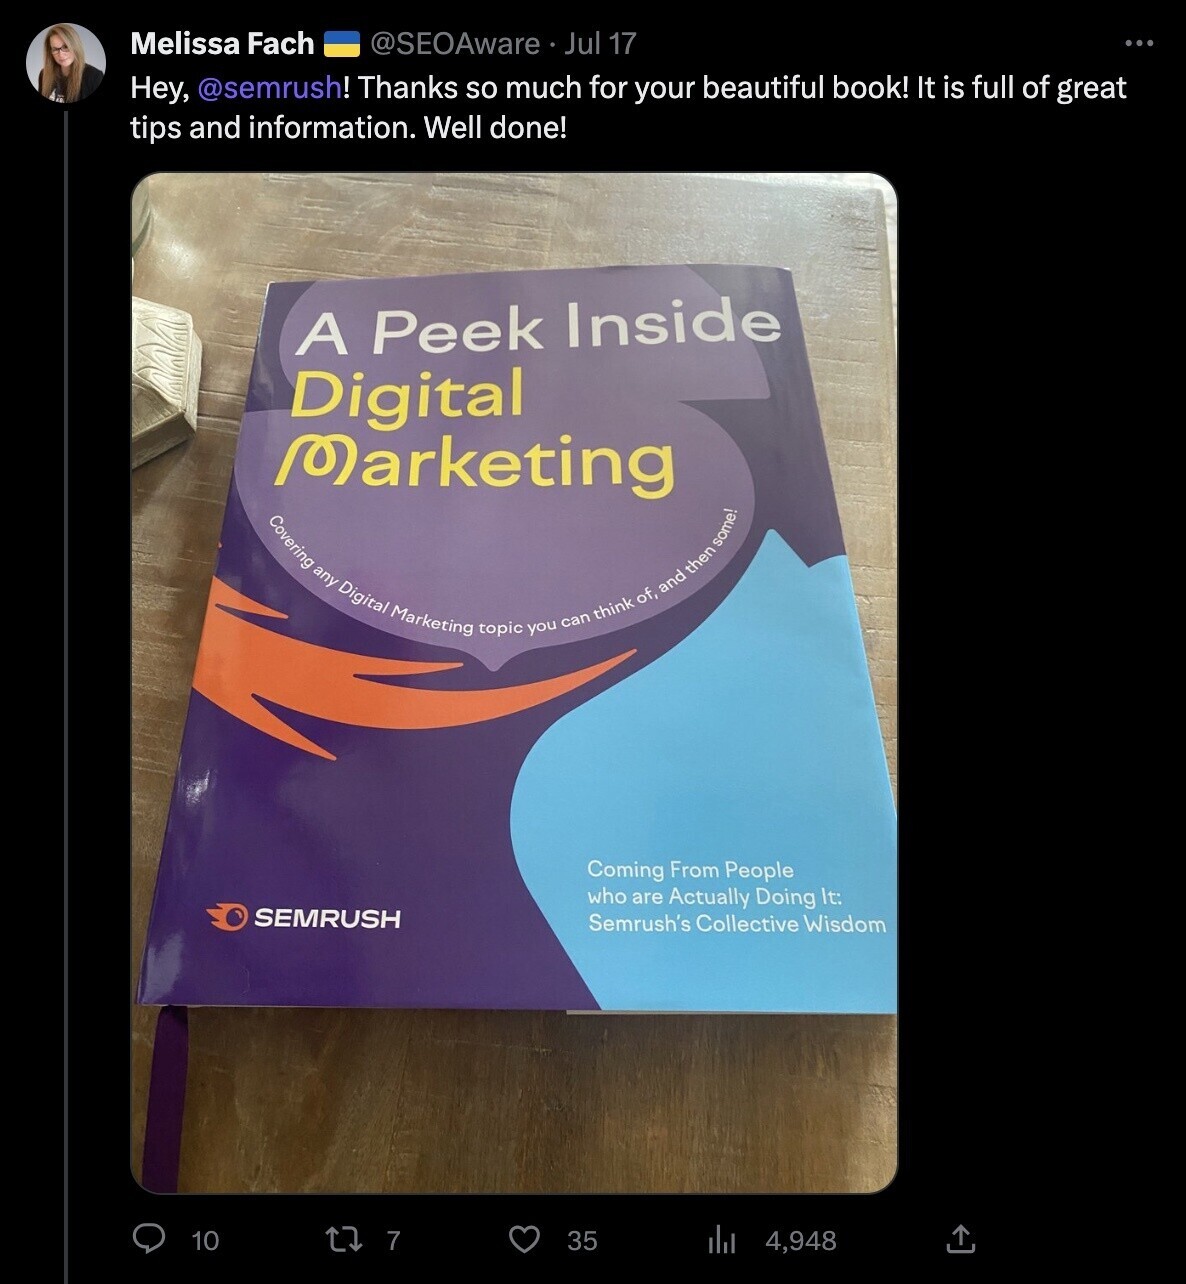 A post from the user "Mellisa Fach" thanking Semrush for the book she won